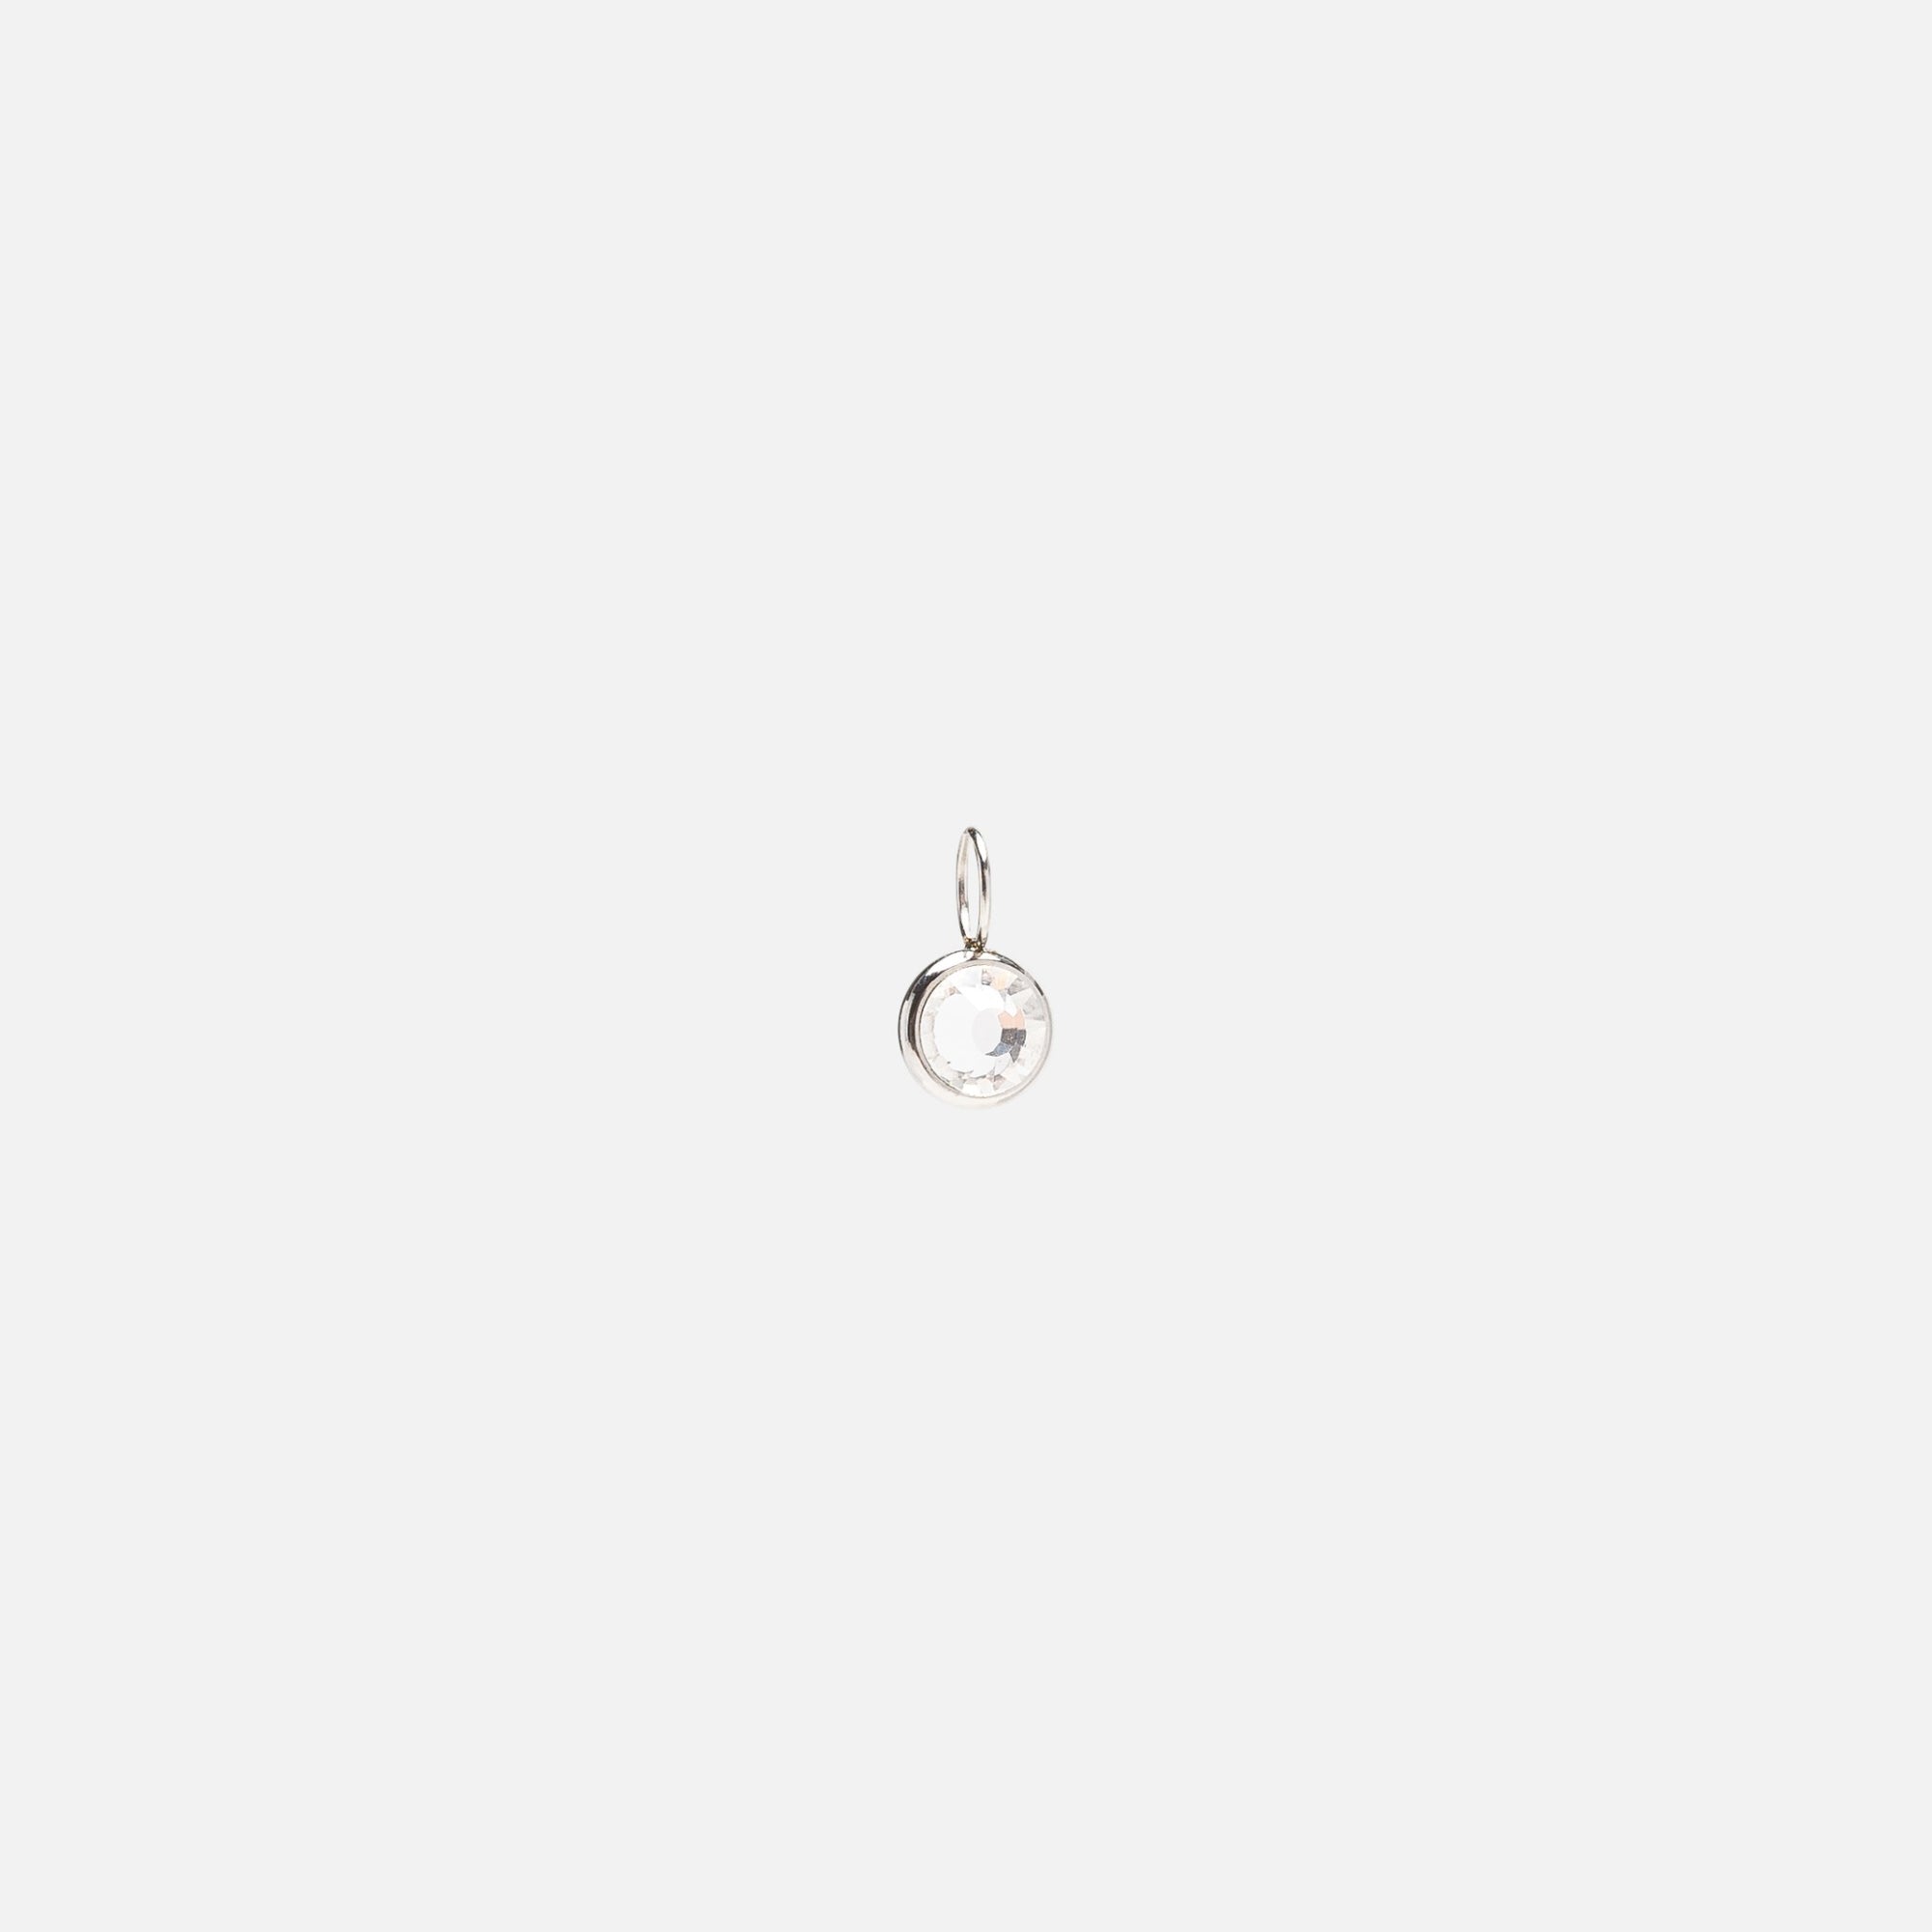 Small silver charm with cubic zirconia